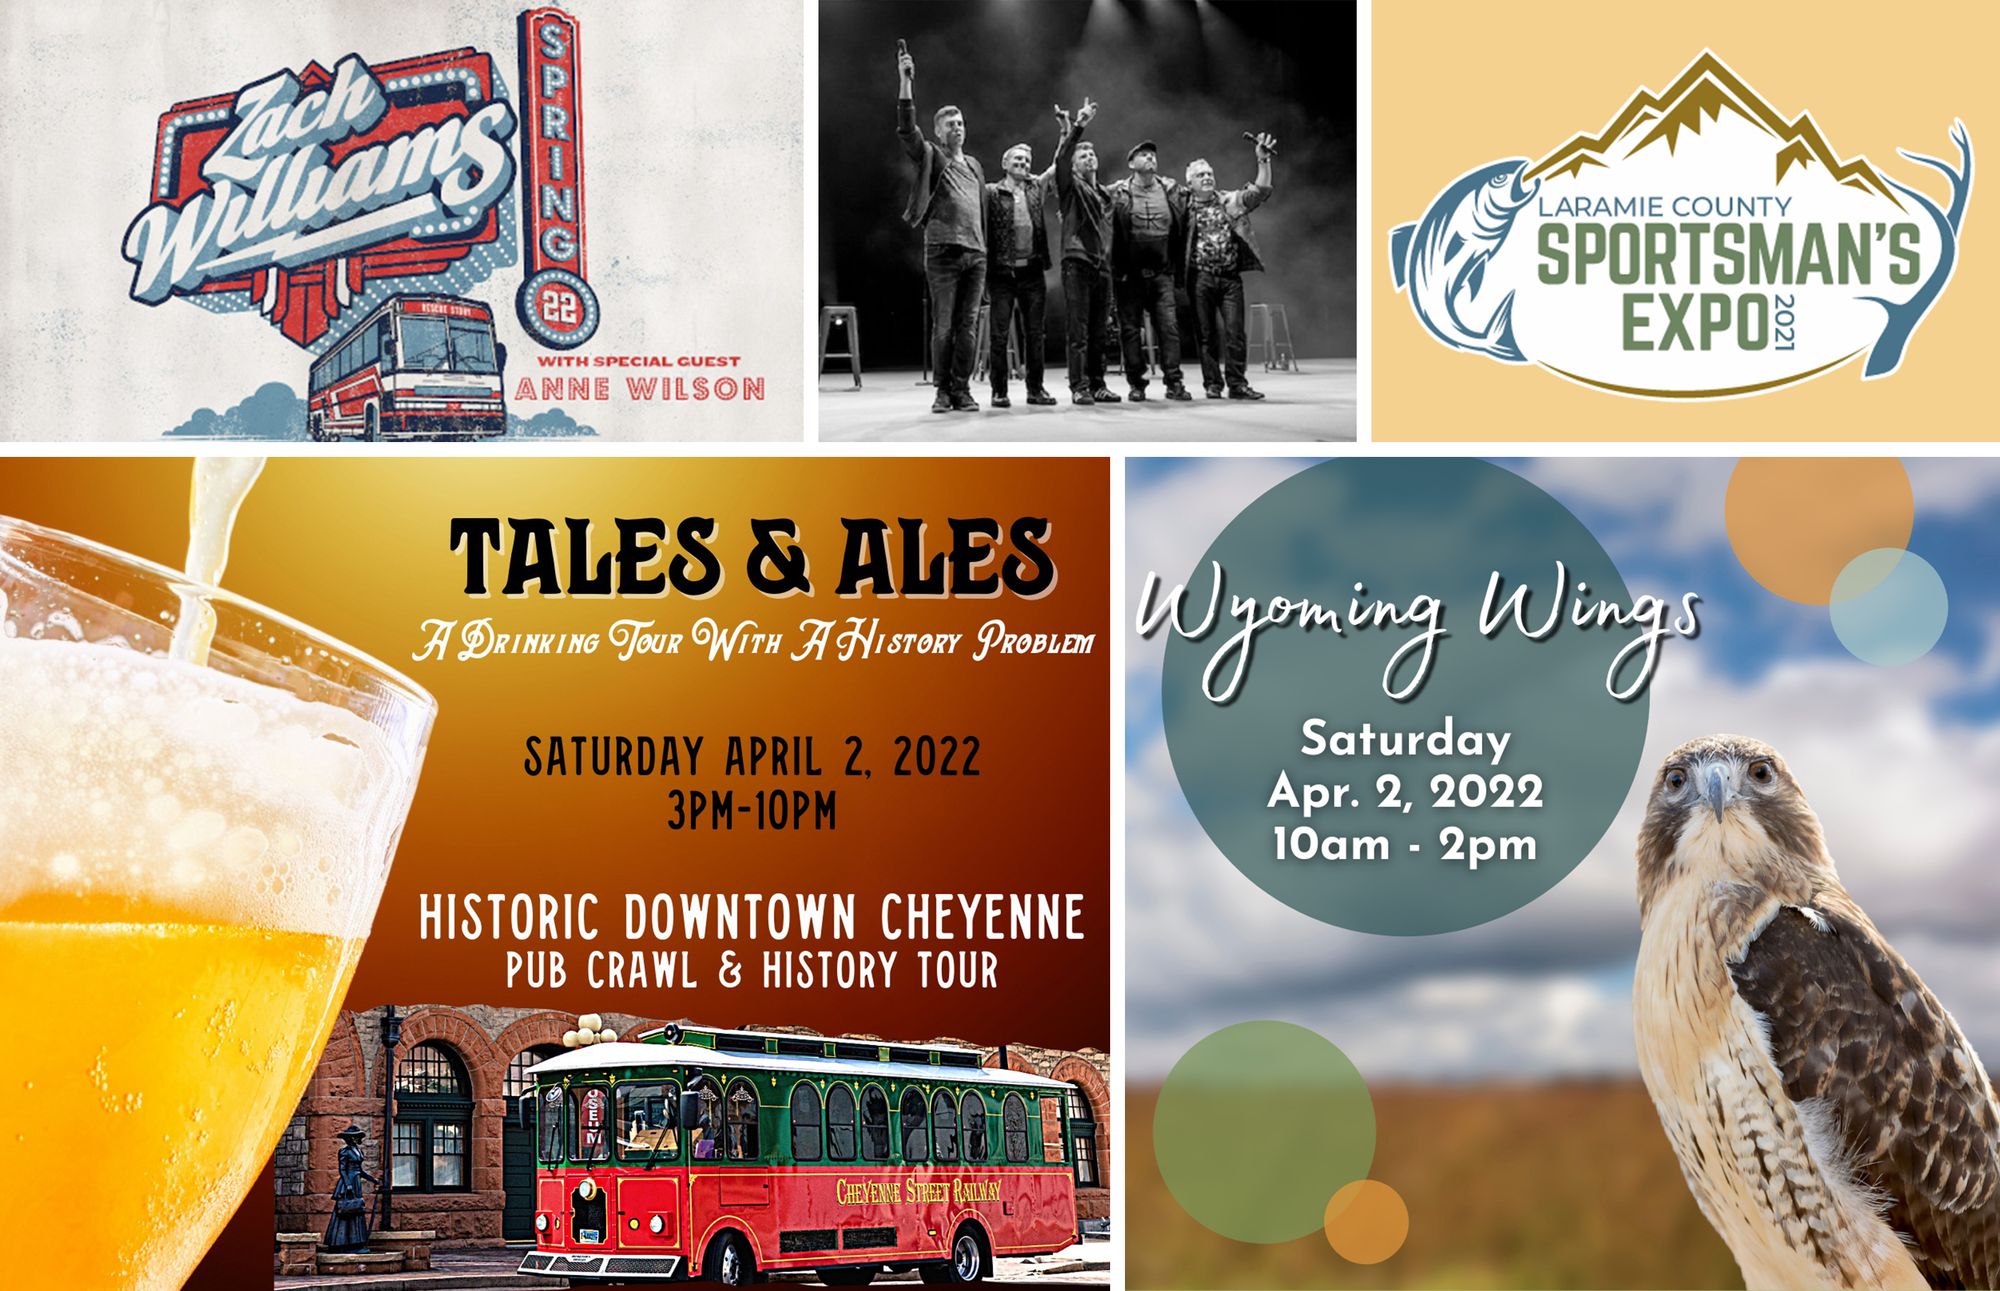 Take A Look At What Is Happening In Cheyenne This Weekend